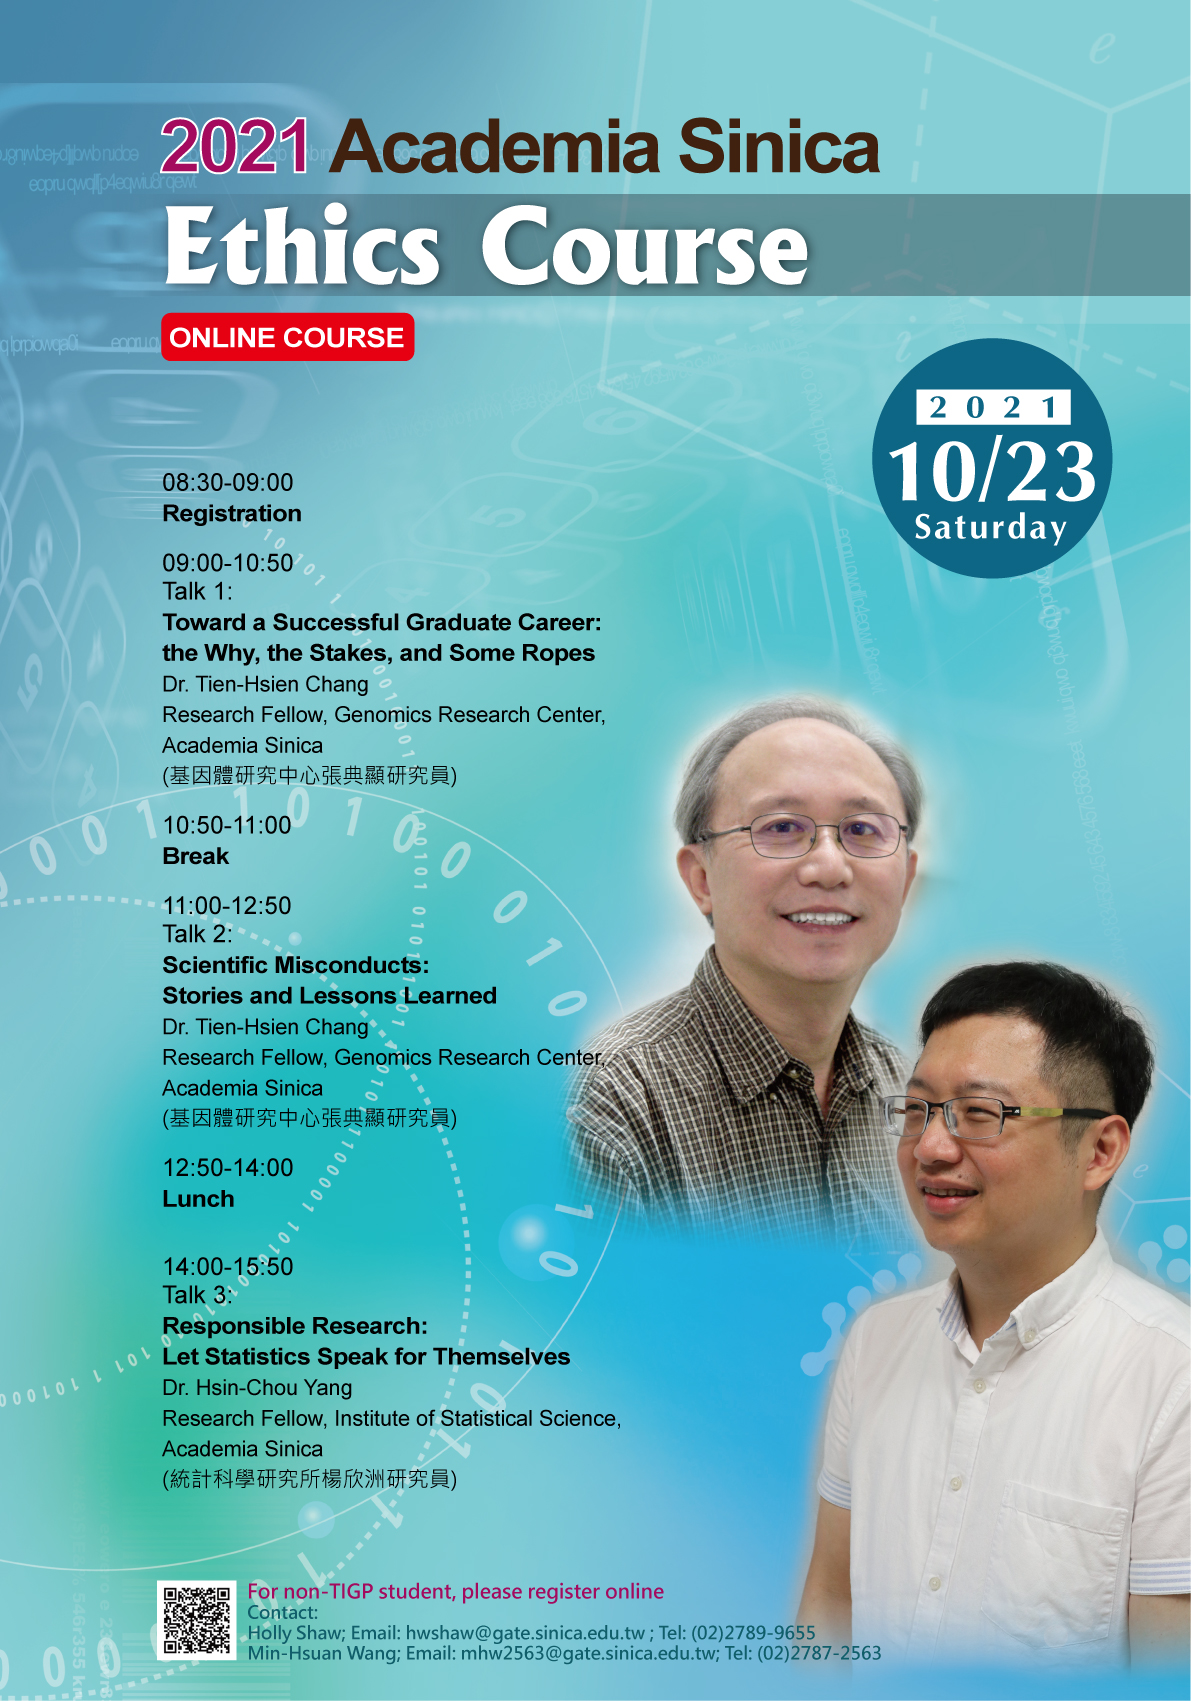 2021 Academia Sinica Ethics Course (Online Lectures)